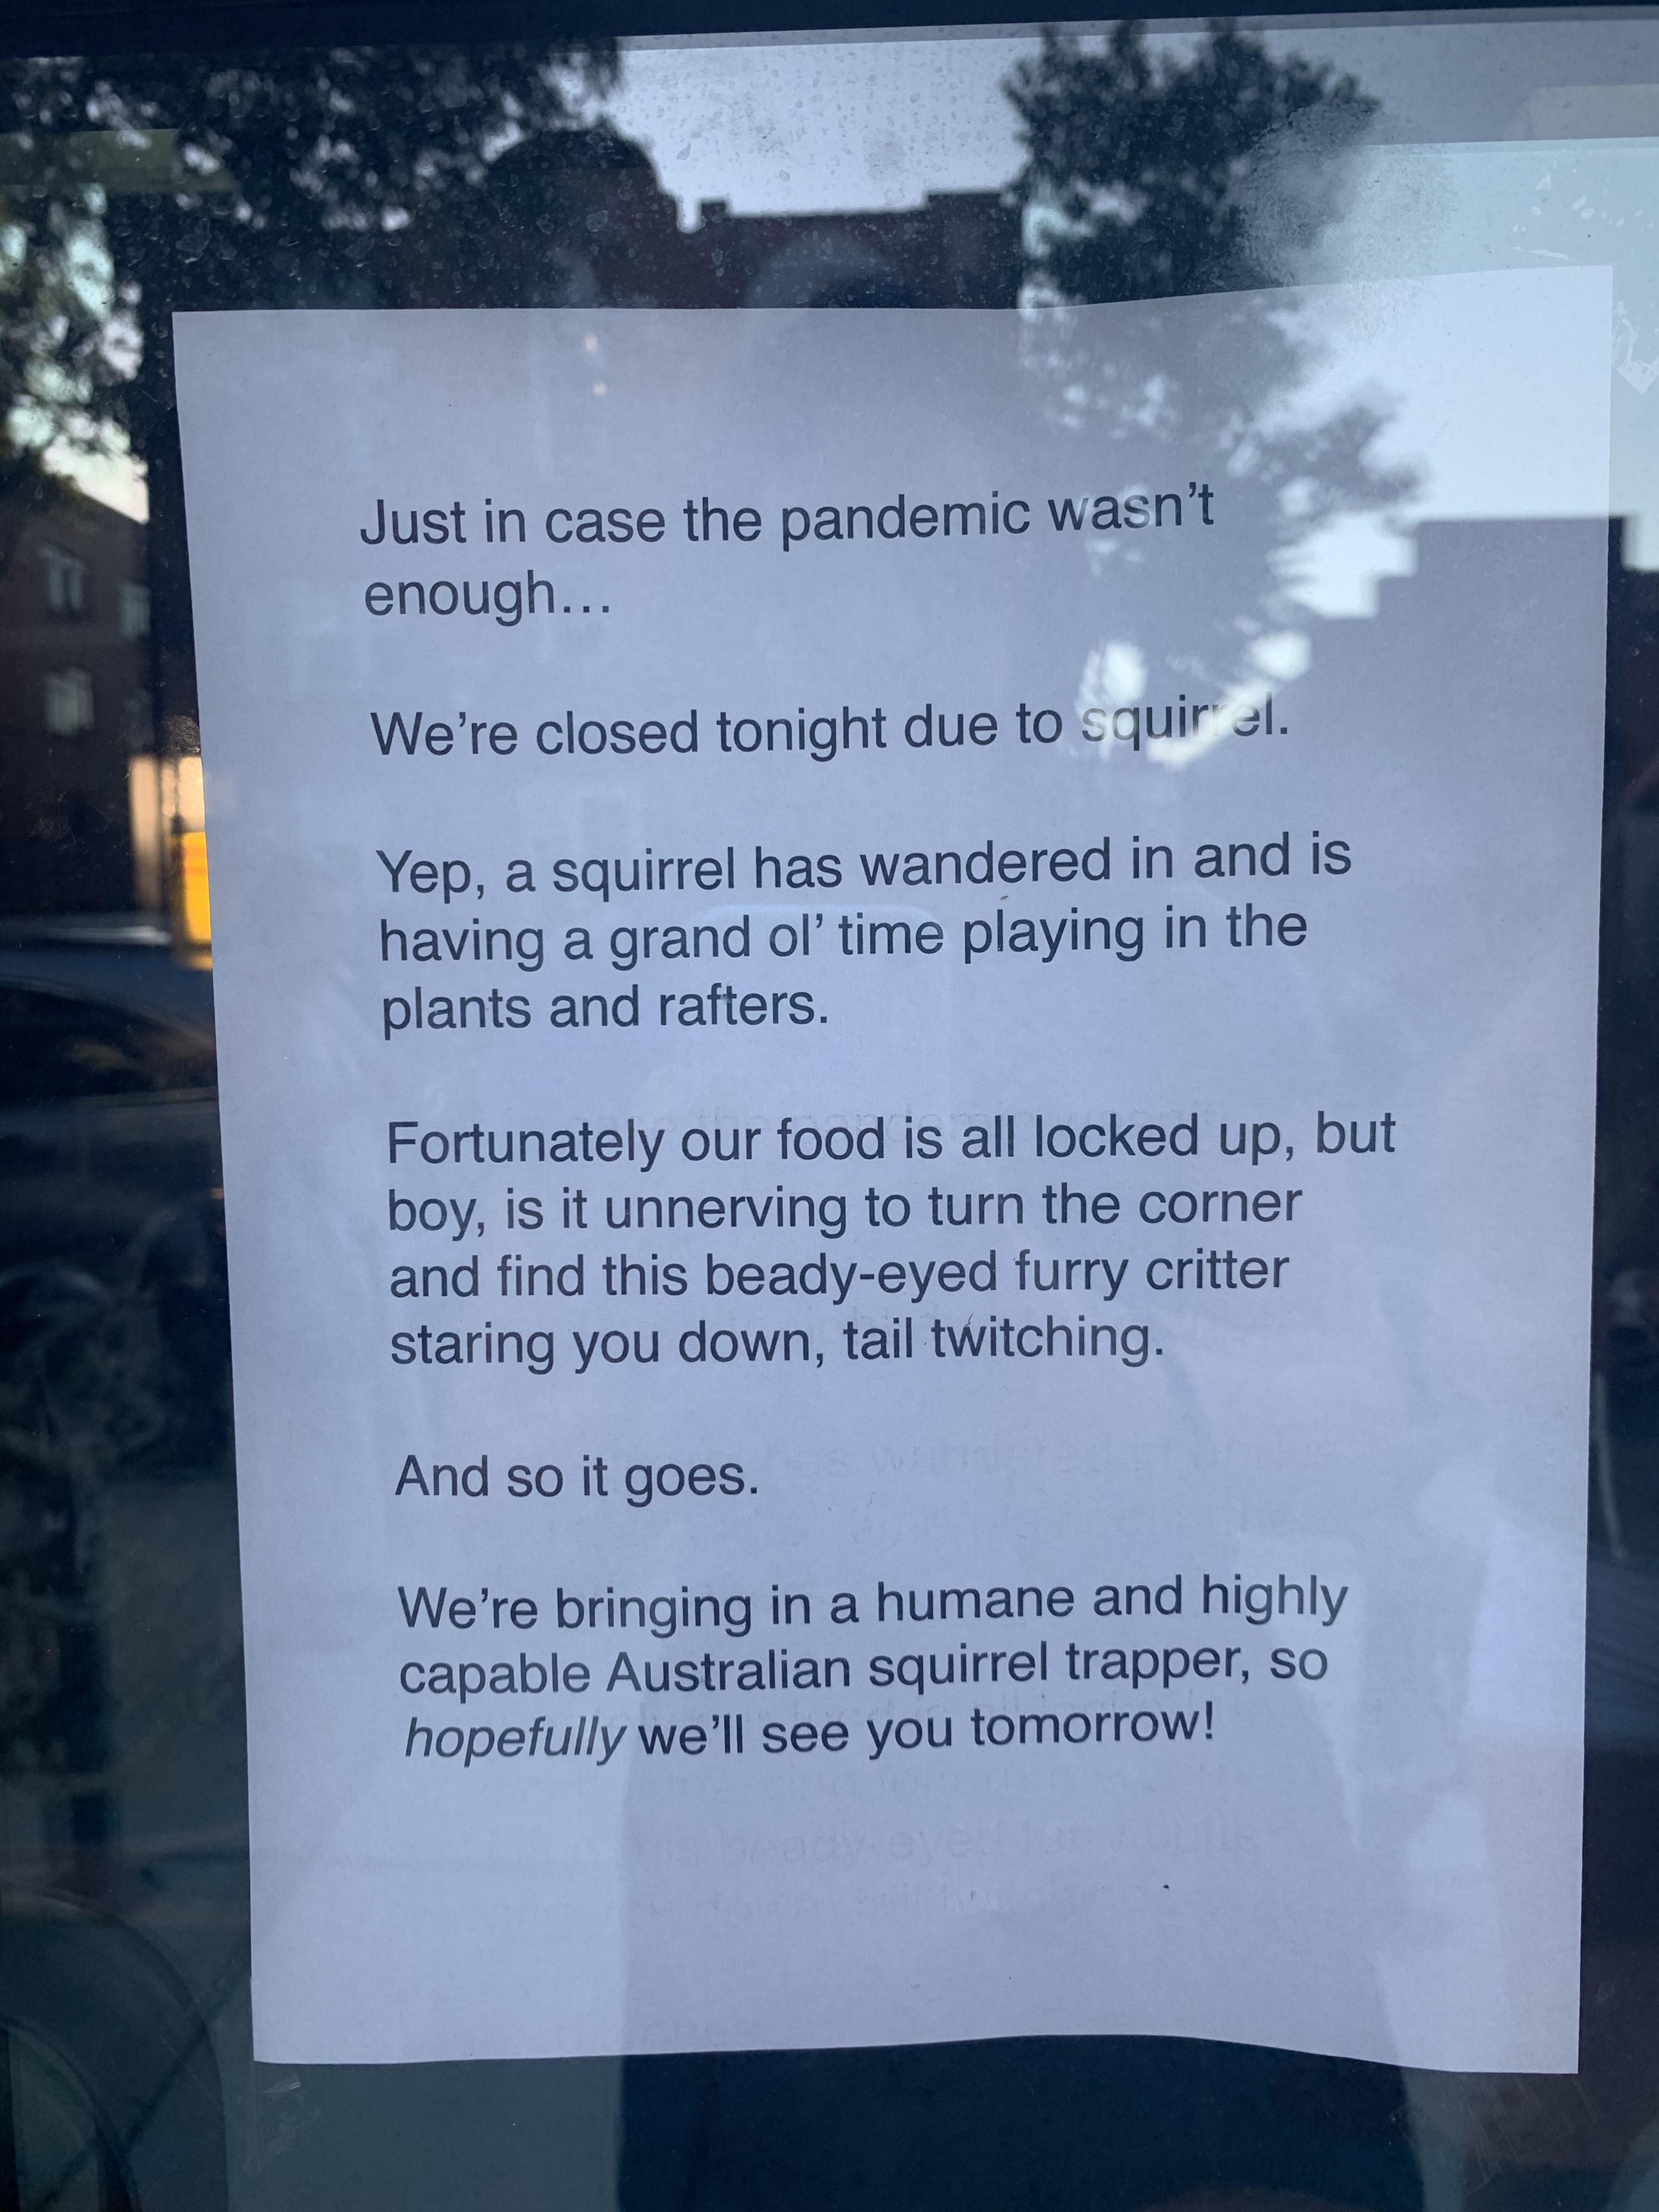 Due to squirrel.